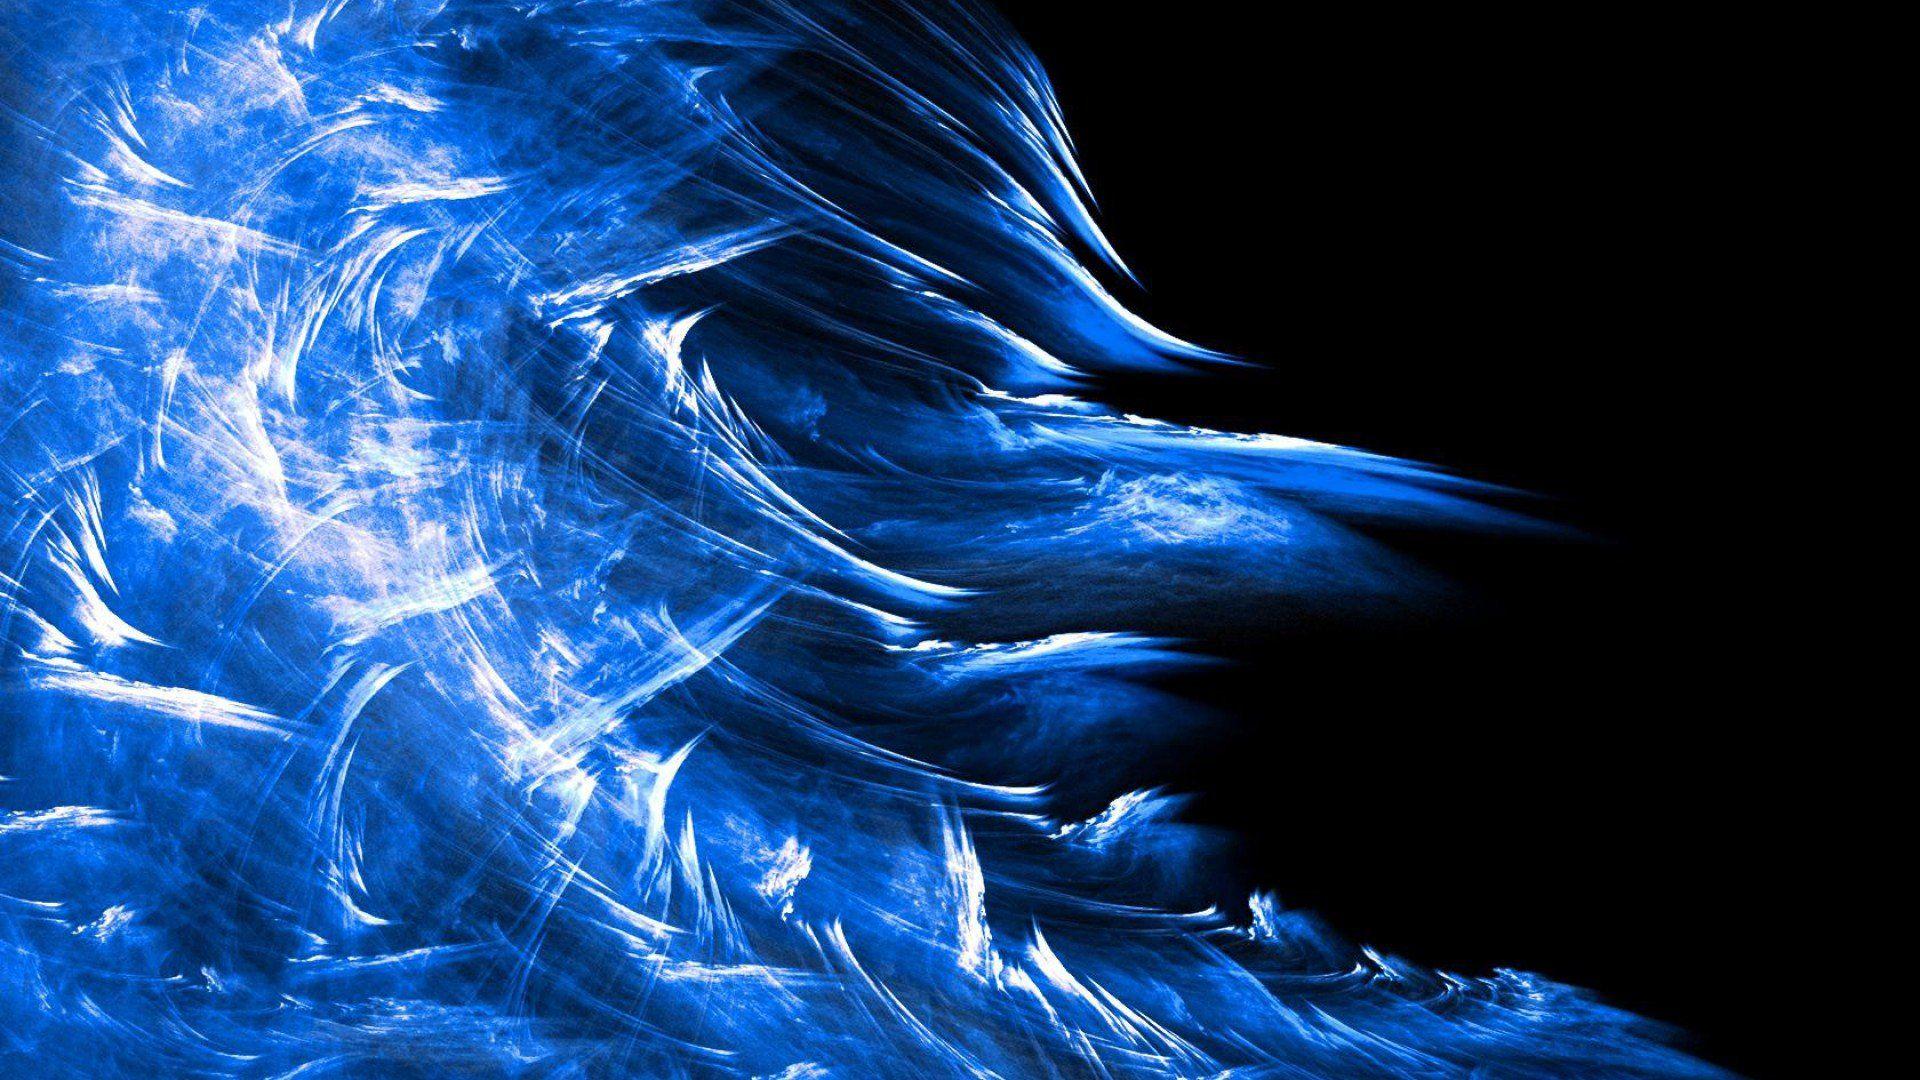 Blue Abstract 1080p Wallpapers - Wallpaper Cave